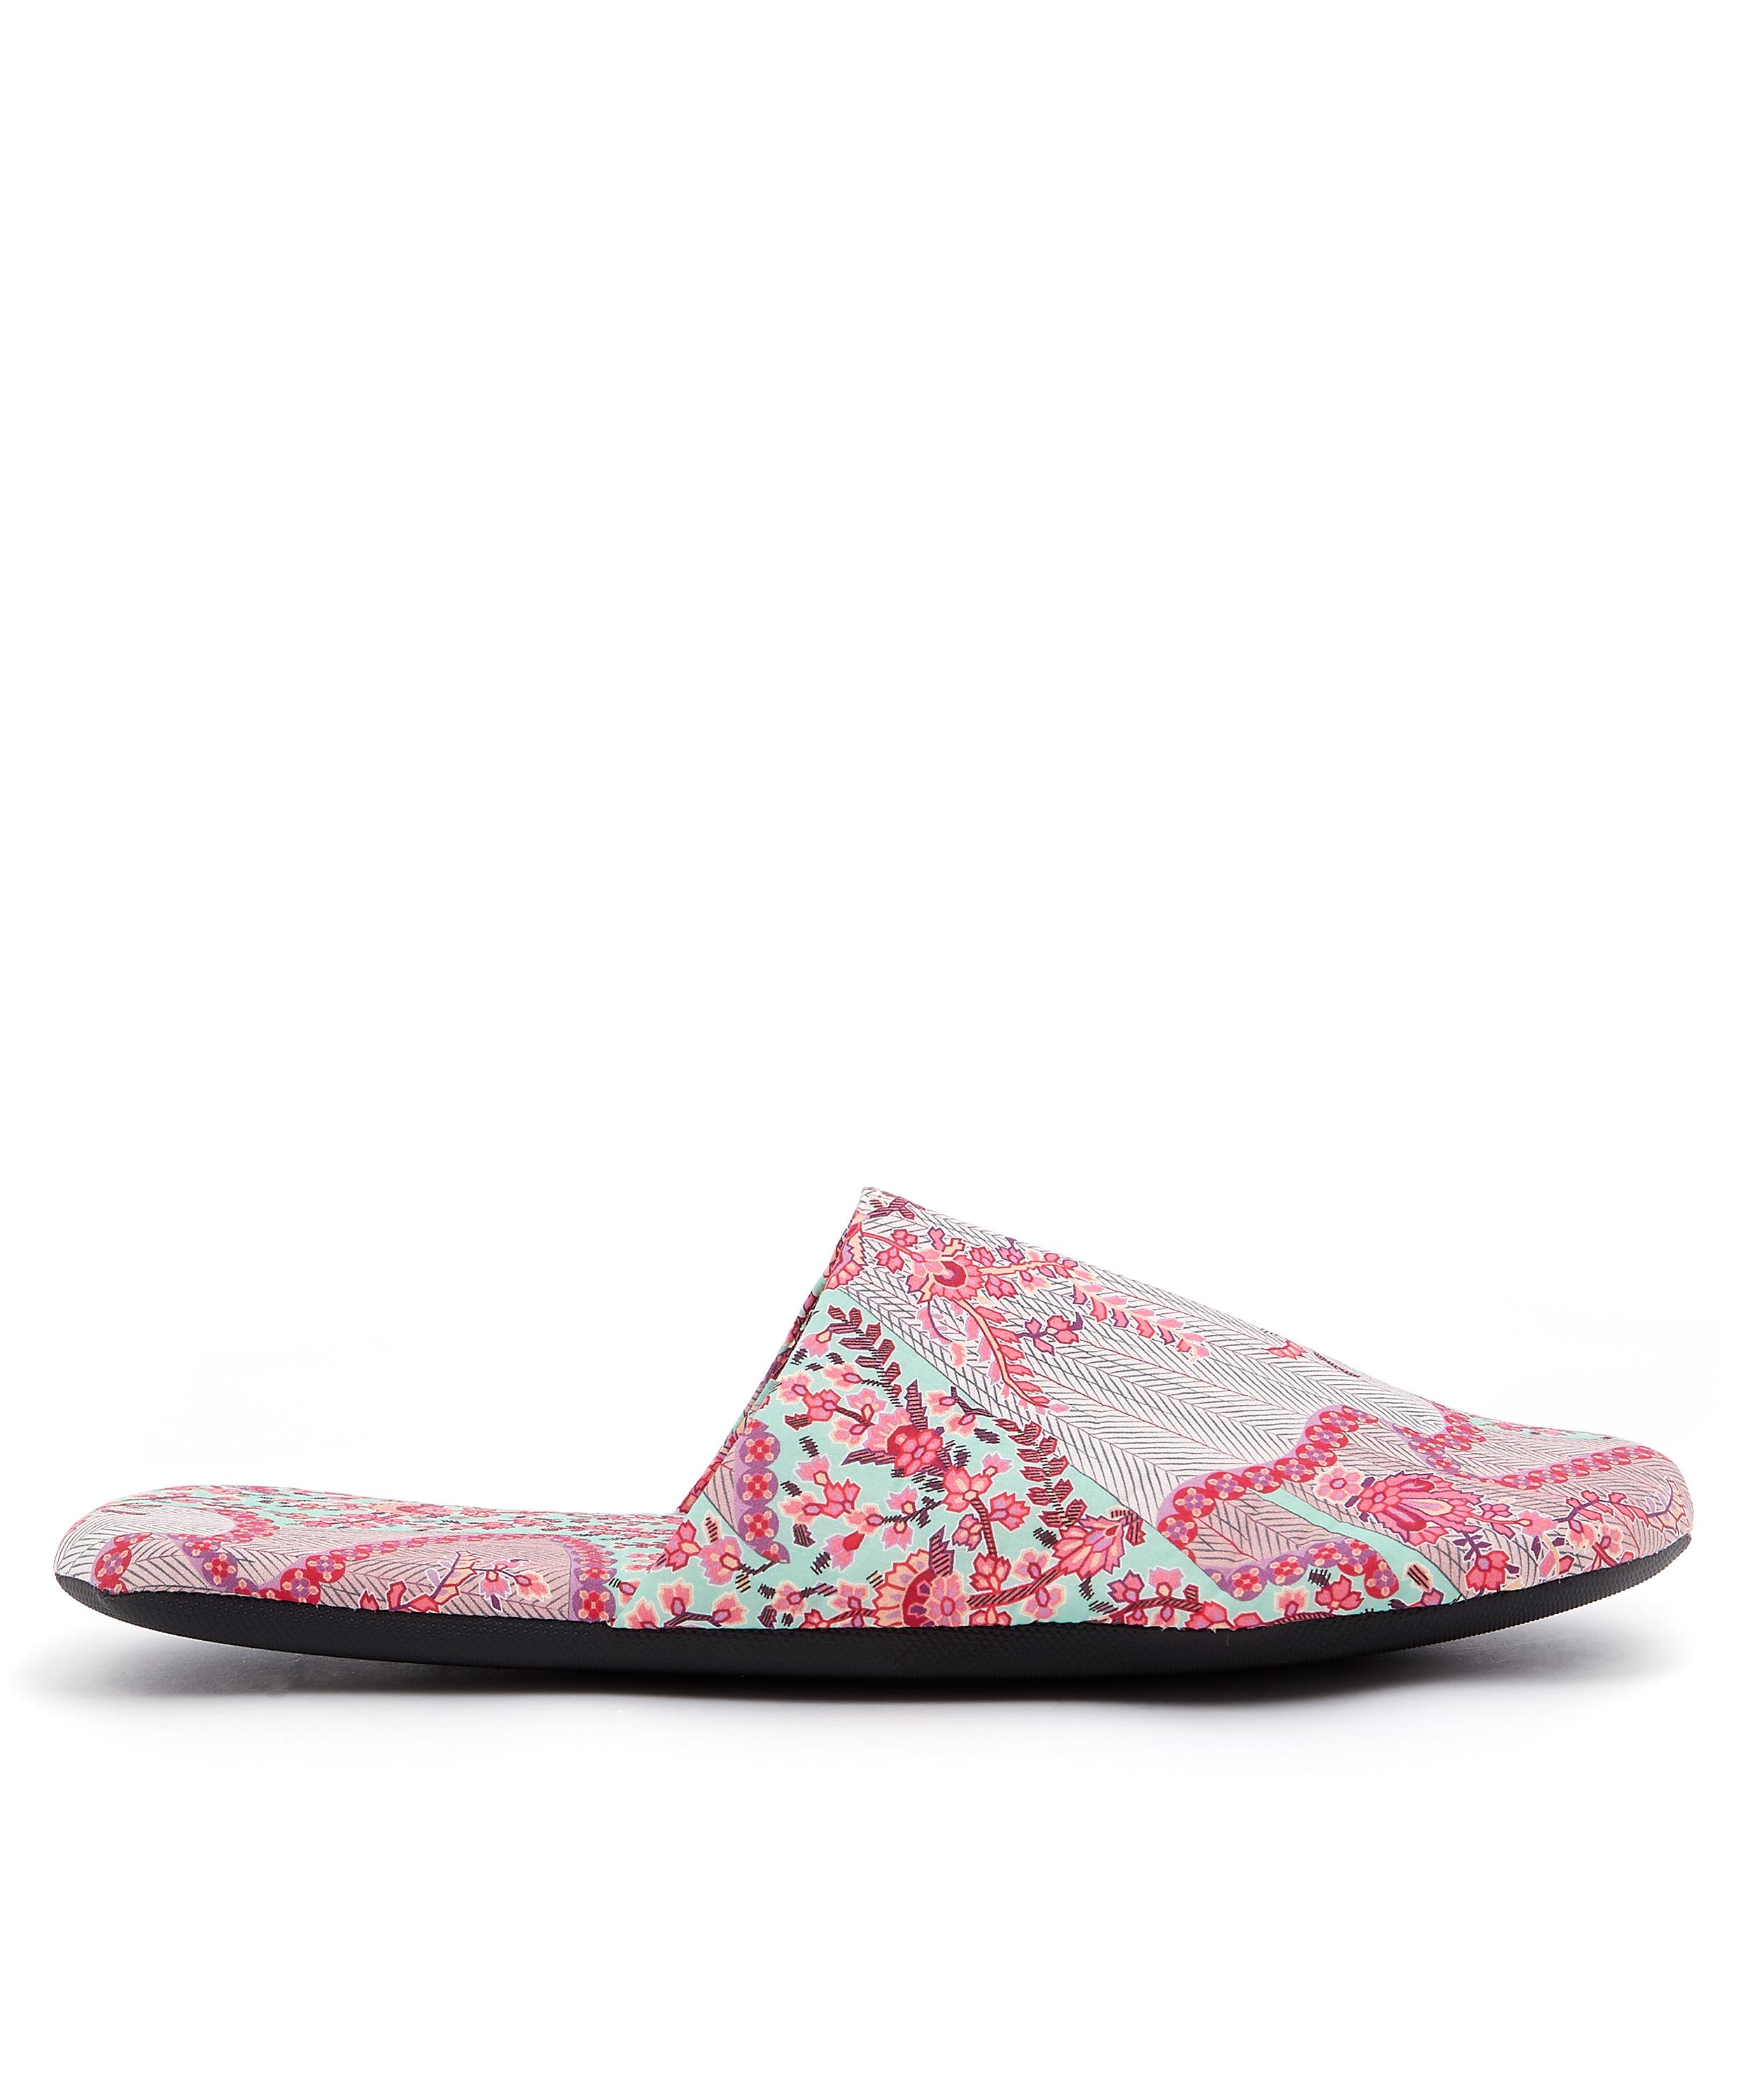 Liberty London Dora Tawn Lawn' Cotton Travel Slippers In Pink